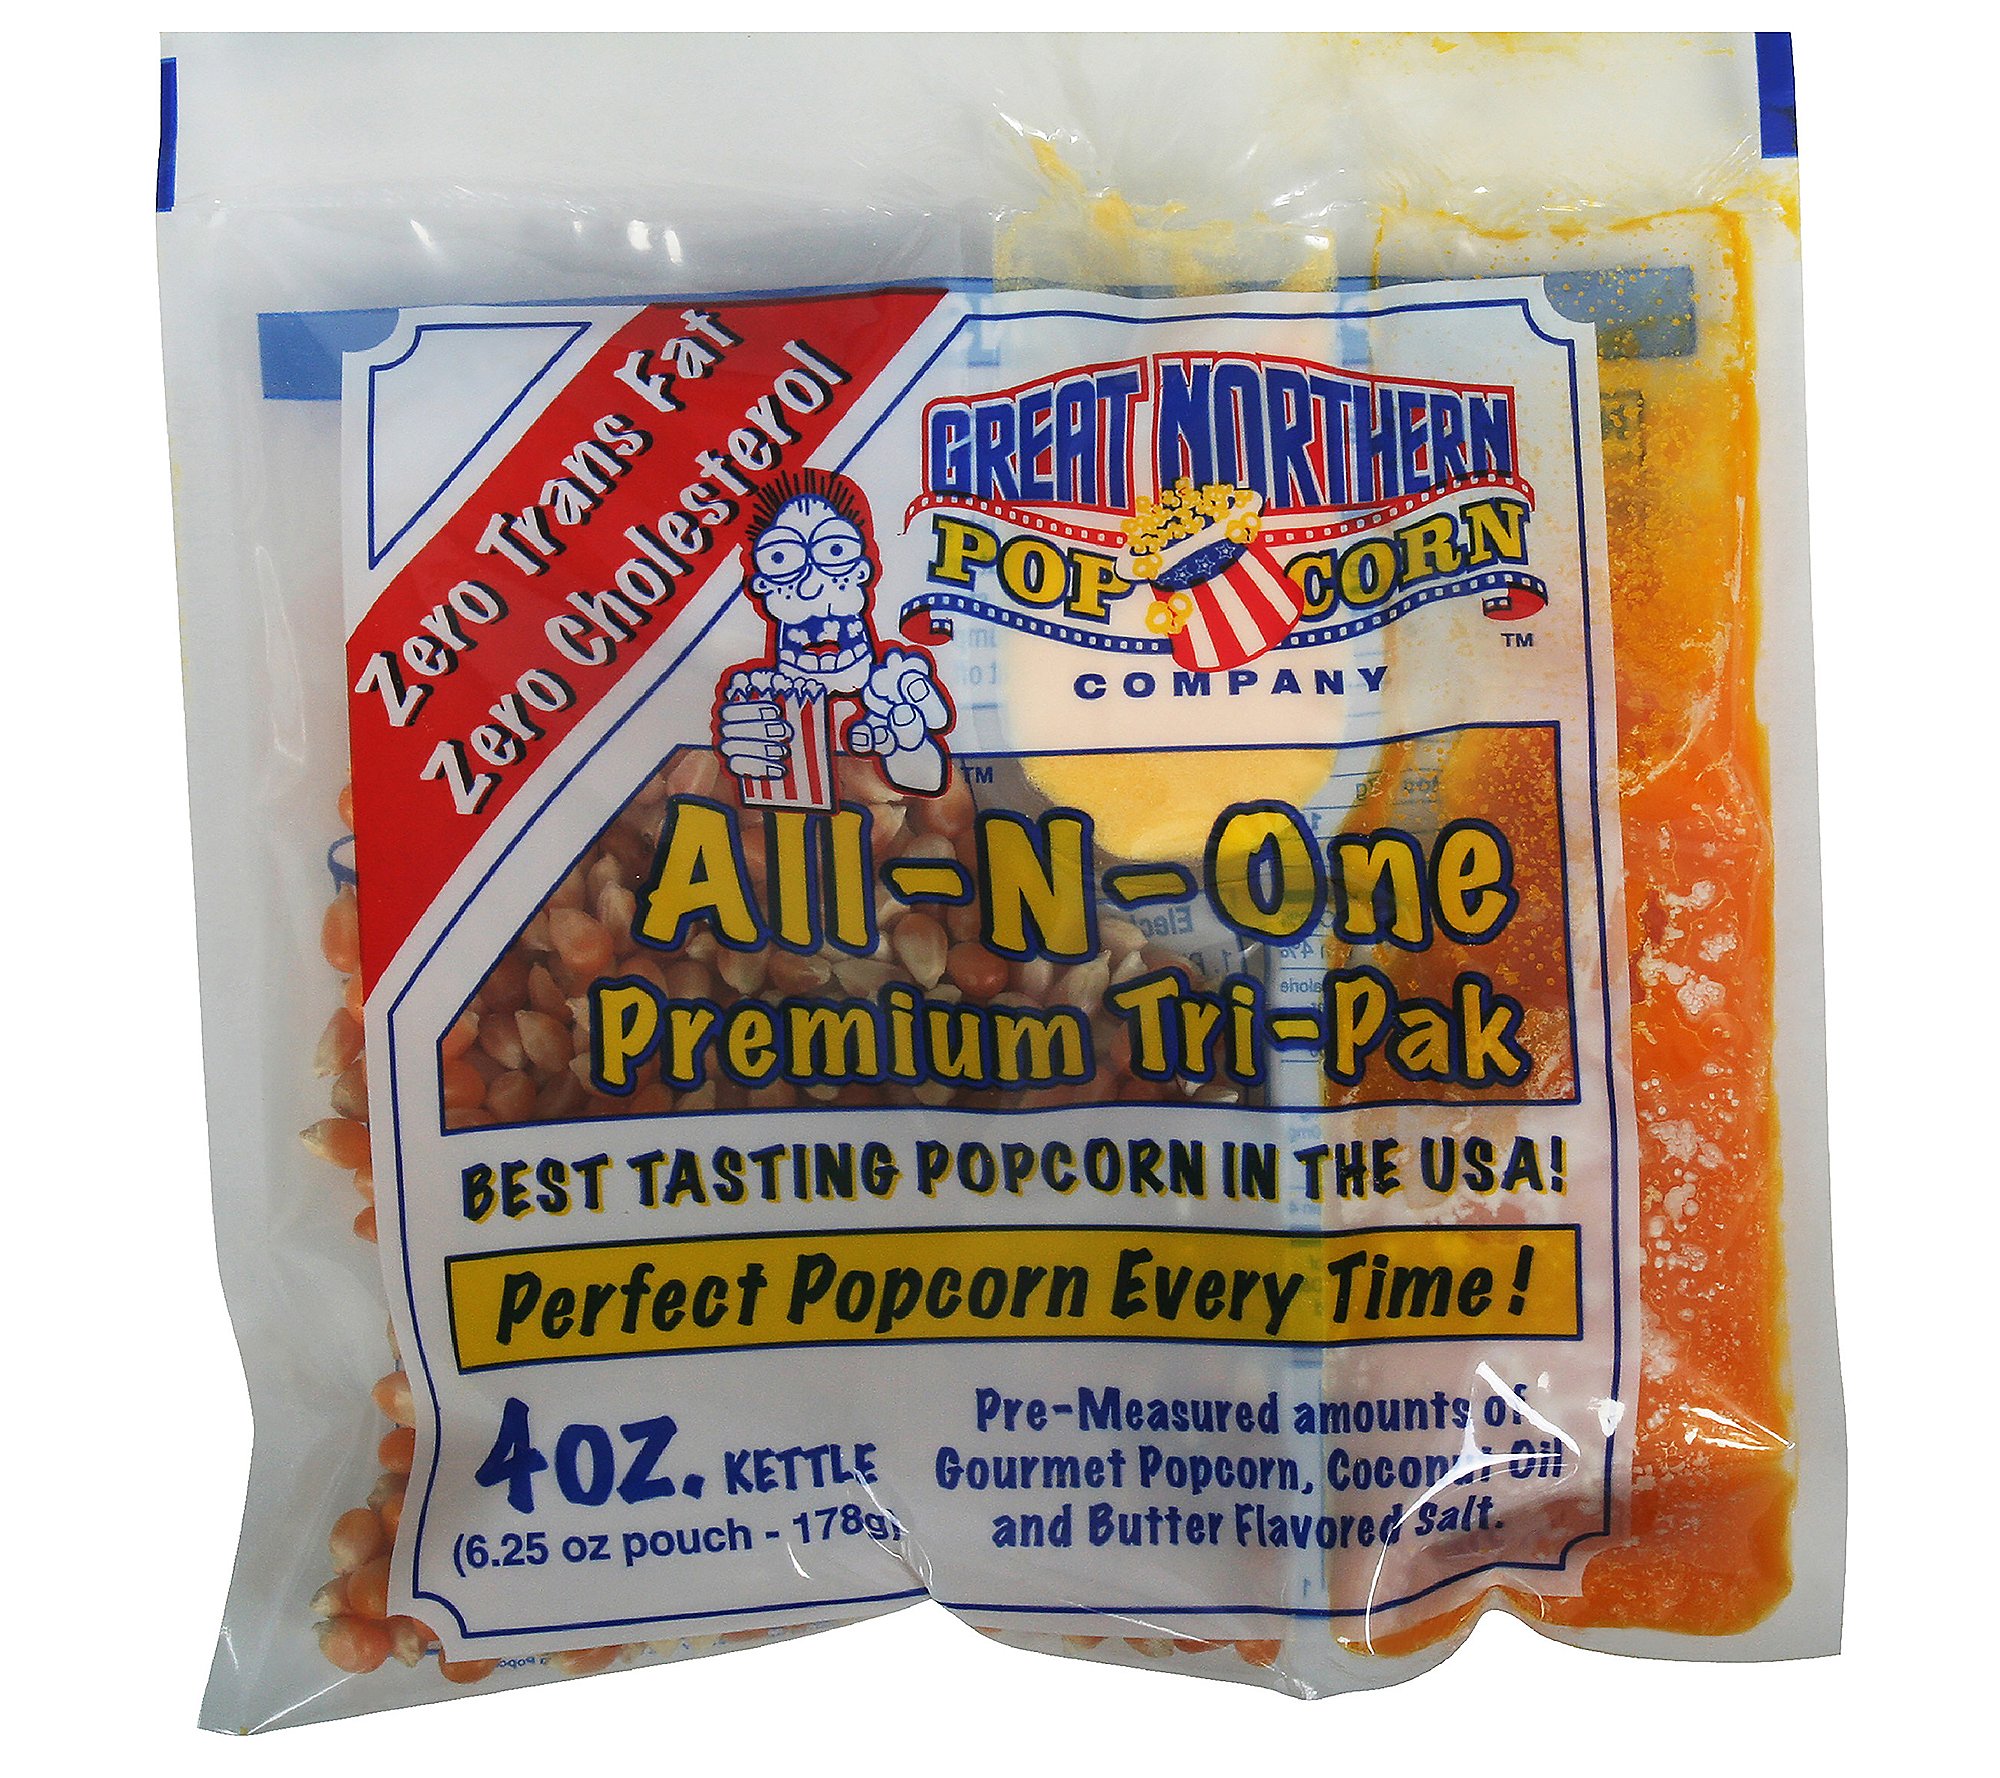 Great Northern (24) 4-oz All-N-One Premium Popc orn Packs